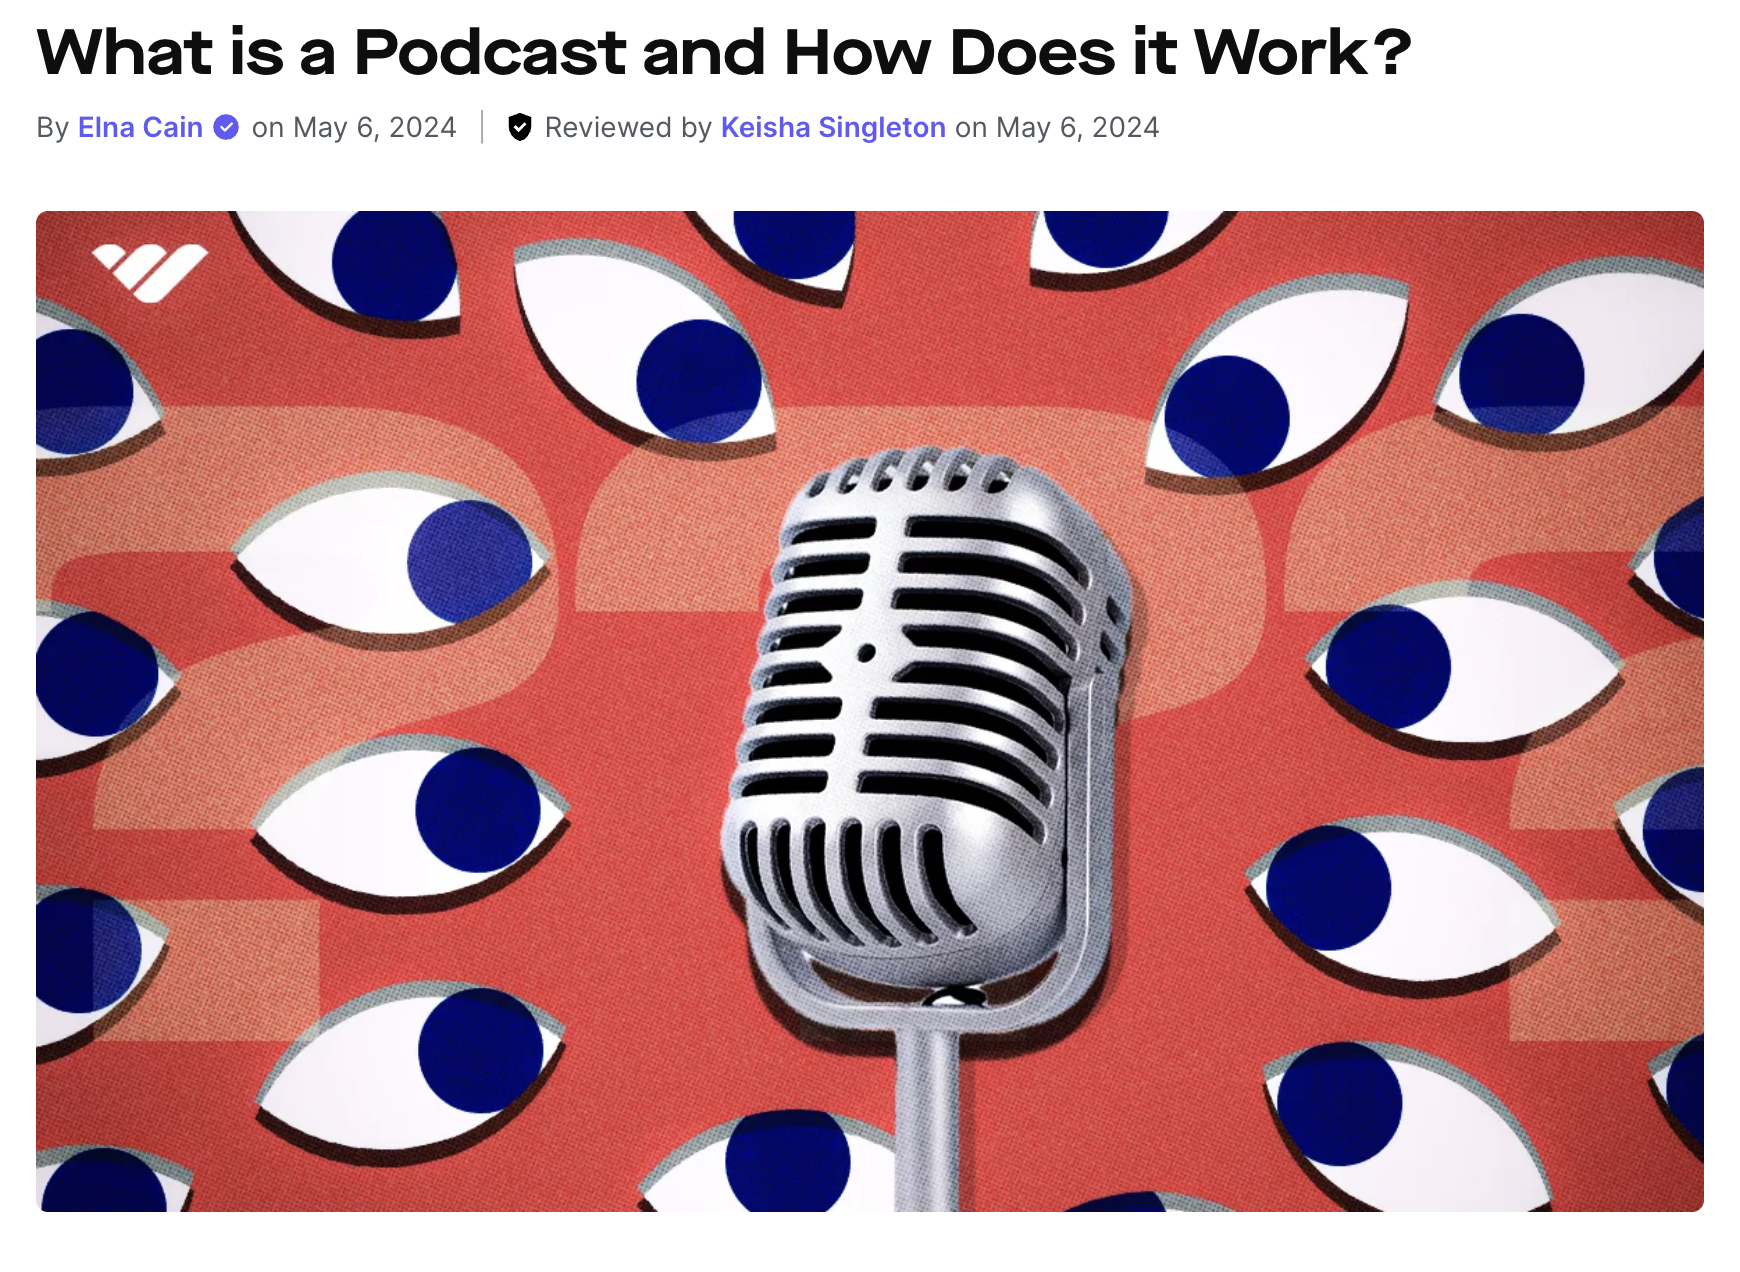 What is a Podcast and How Does it Work?